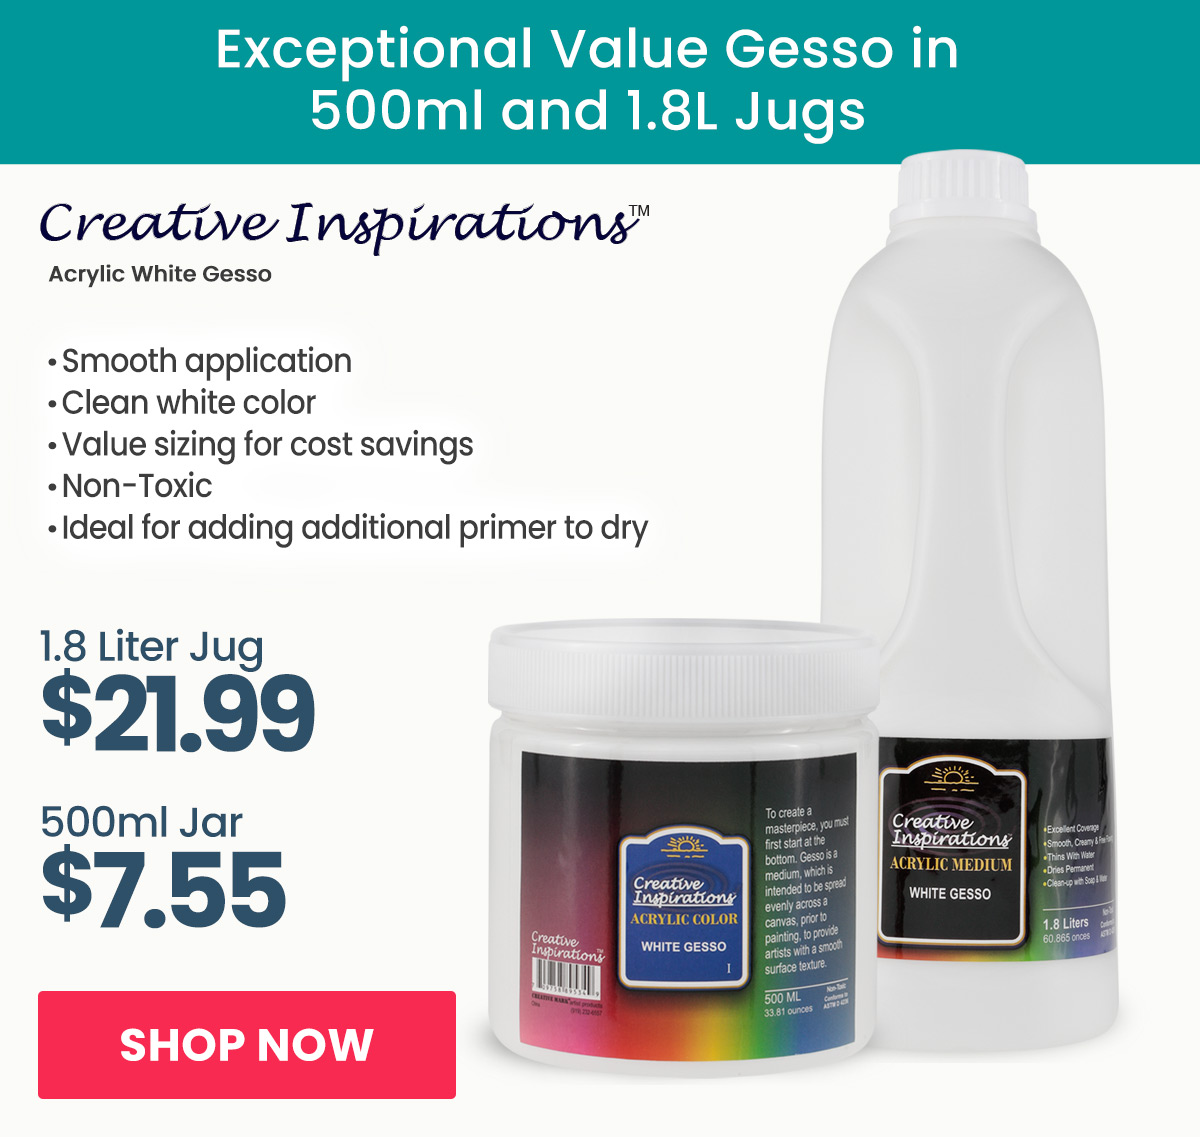 Creative Inspirations Acrylic White Gesso